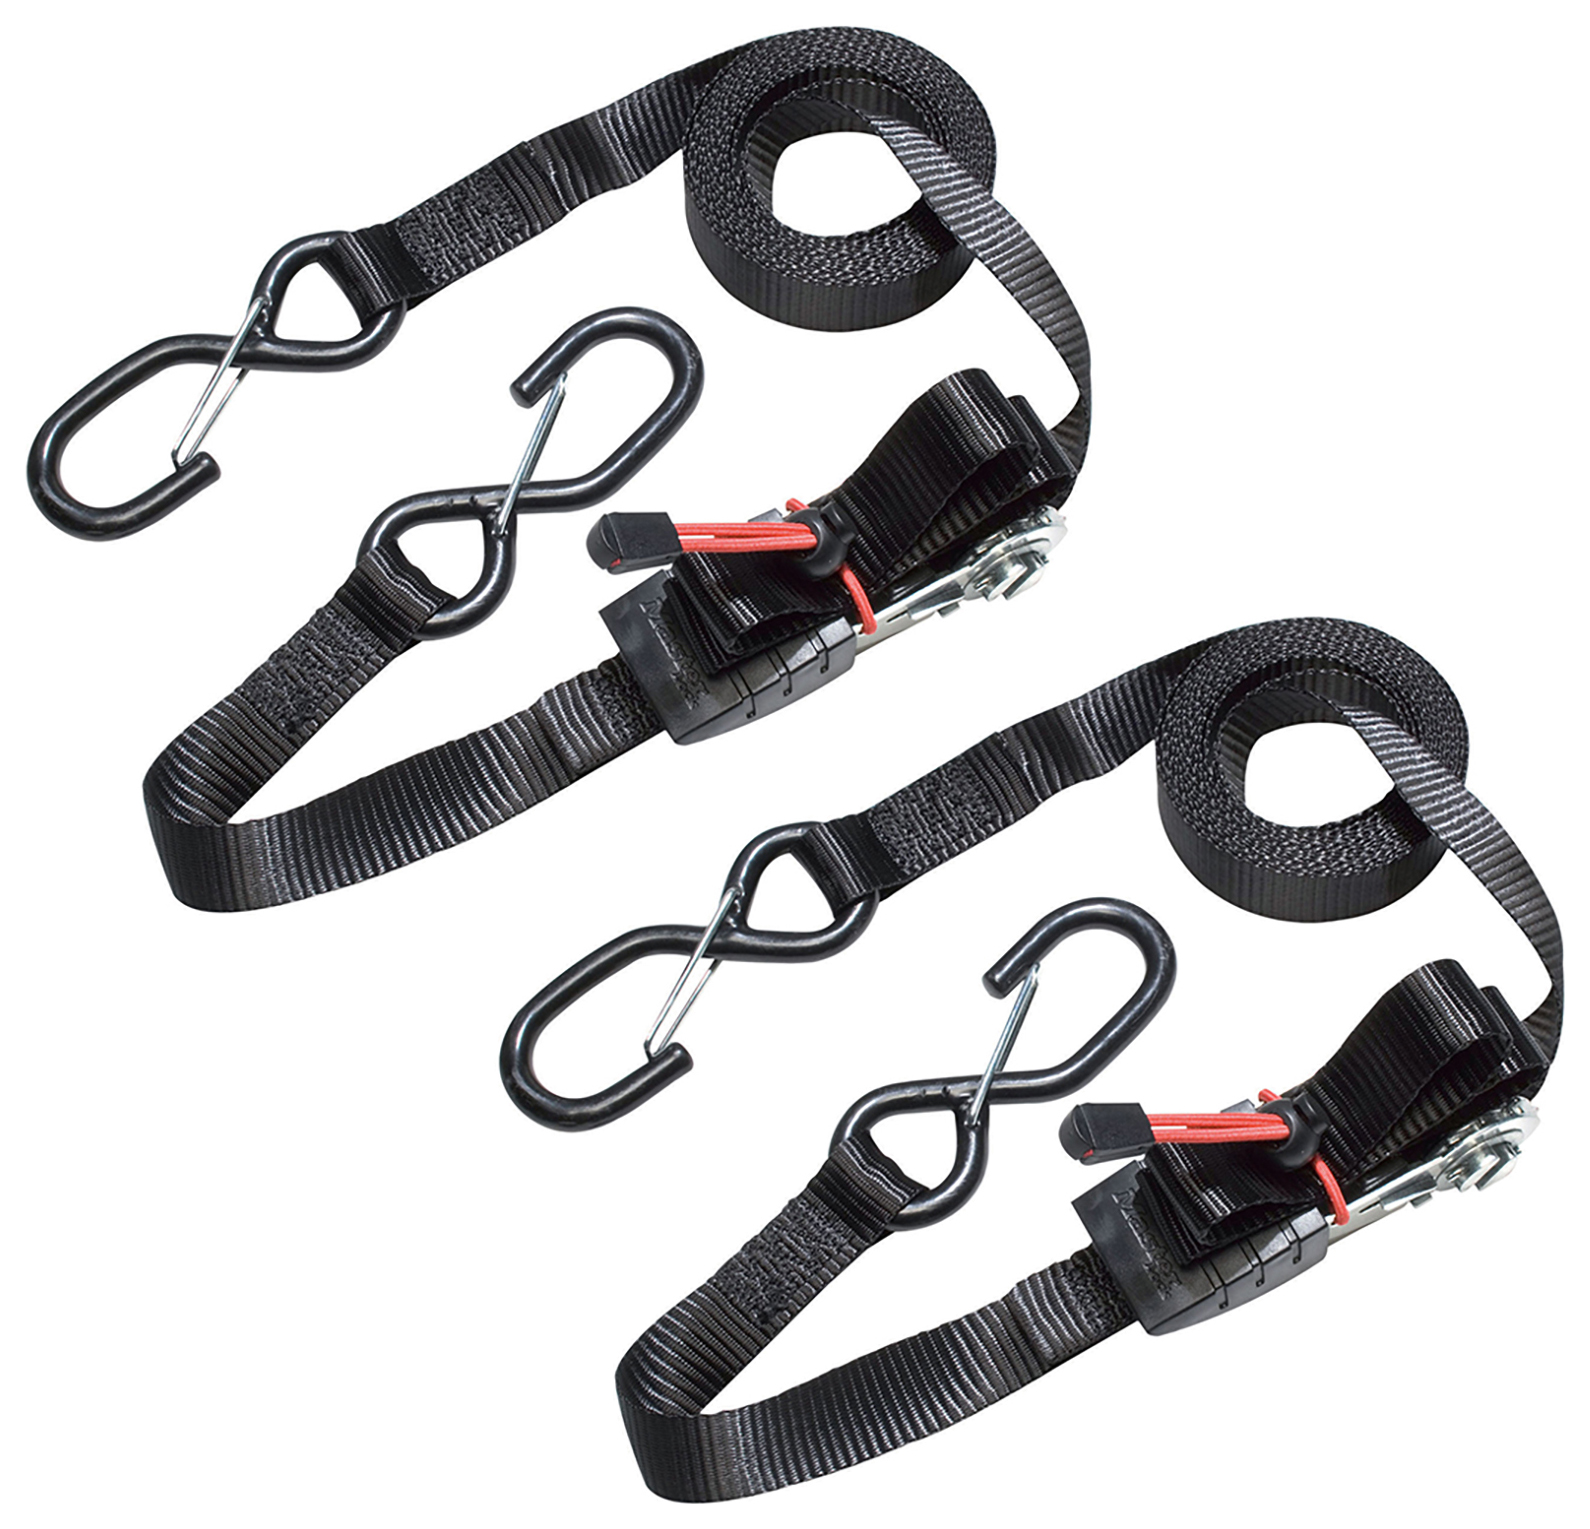 Image of Master Lock Black Ratchet Tie Down Strap with S-Hooks - 4.25m x 25mm - Pack of 2